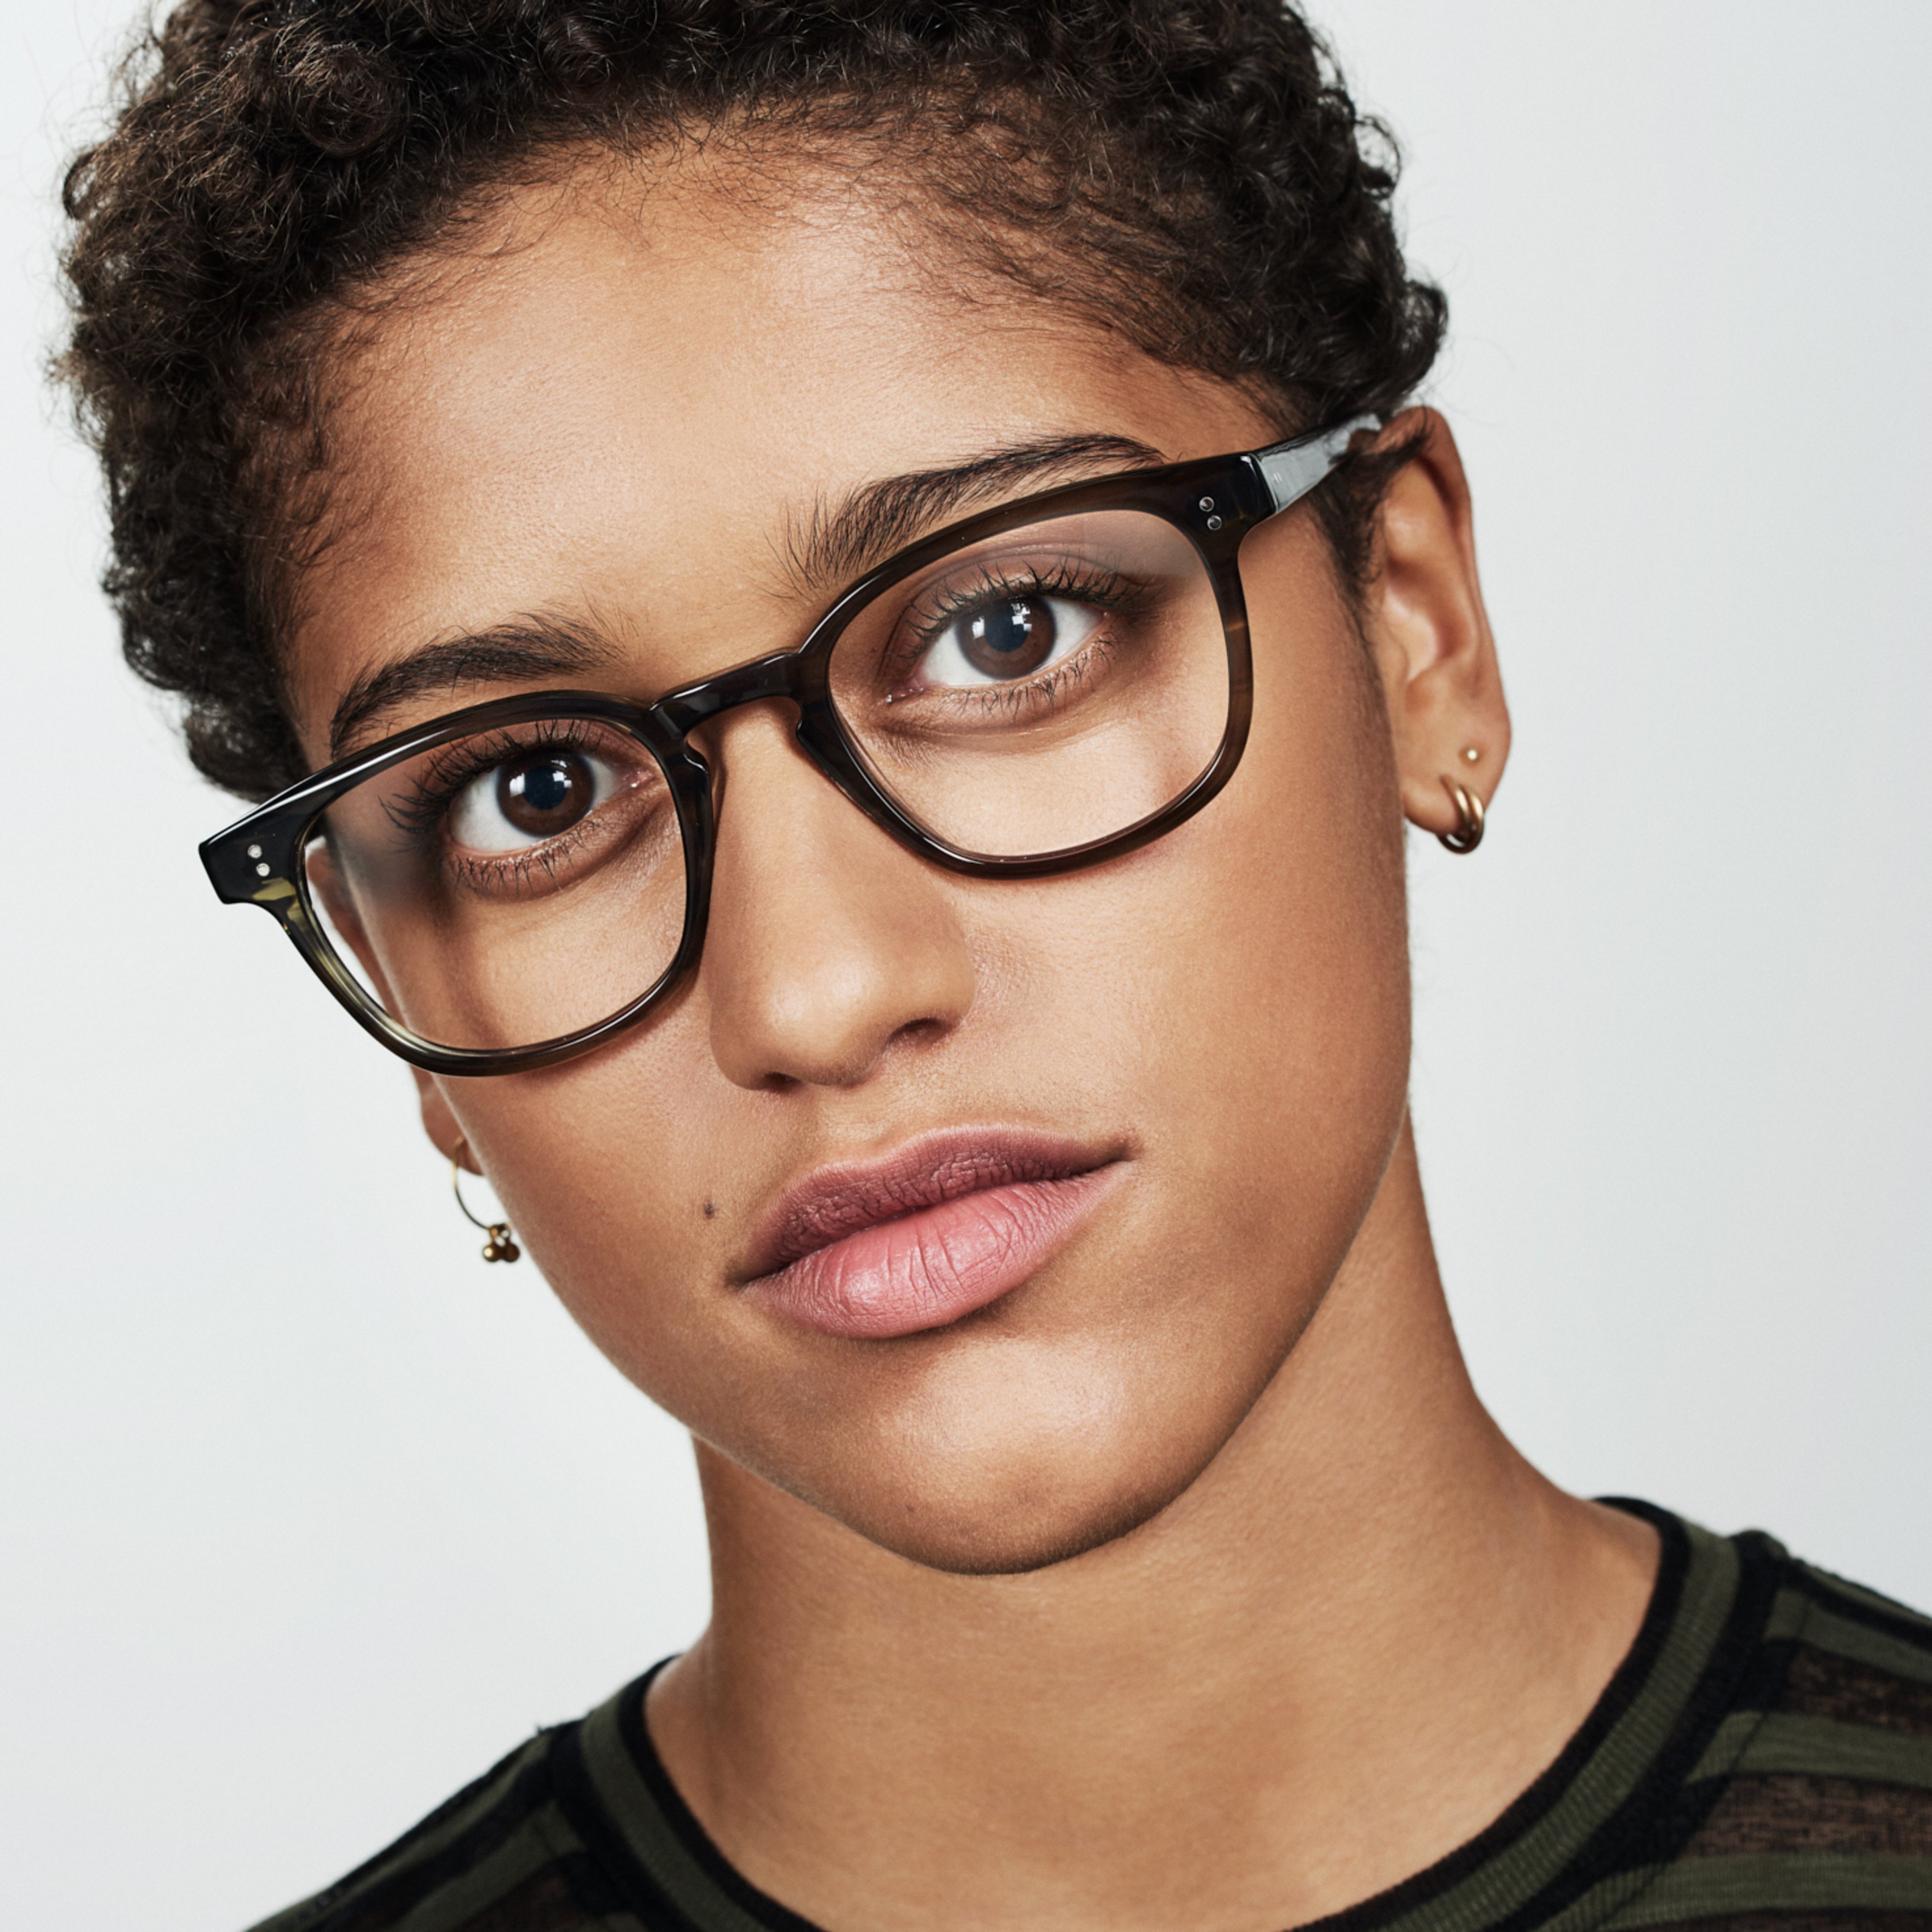 Ace & Tate Glasses | square acetate in Green